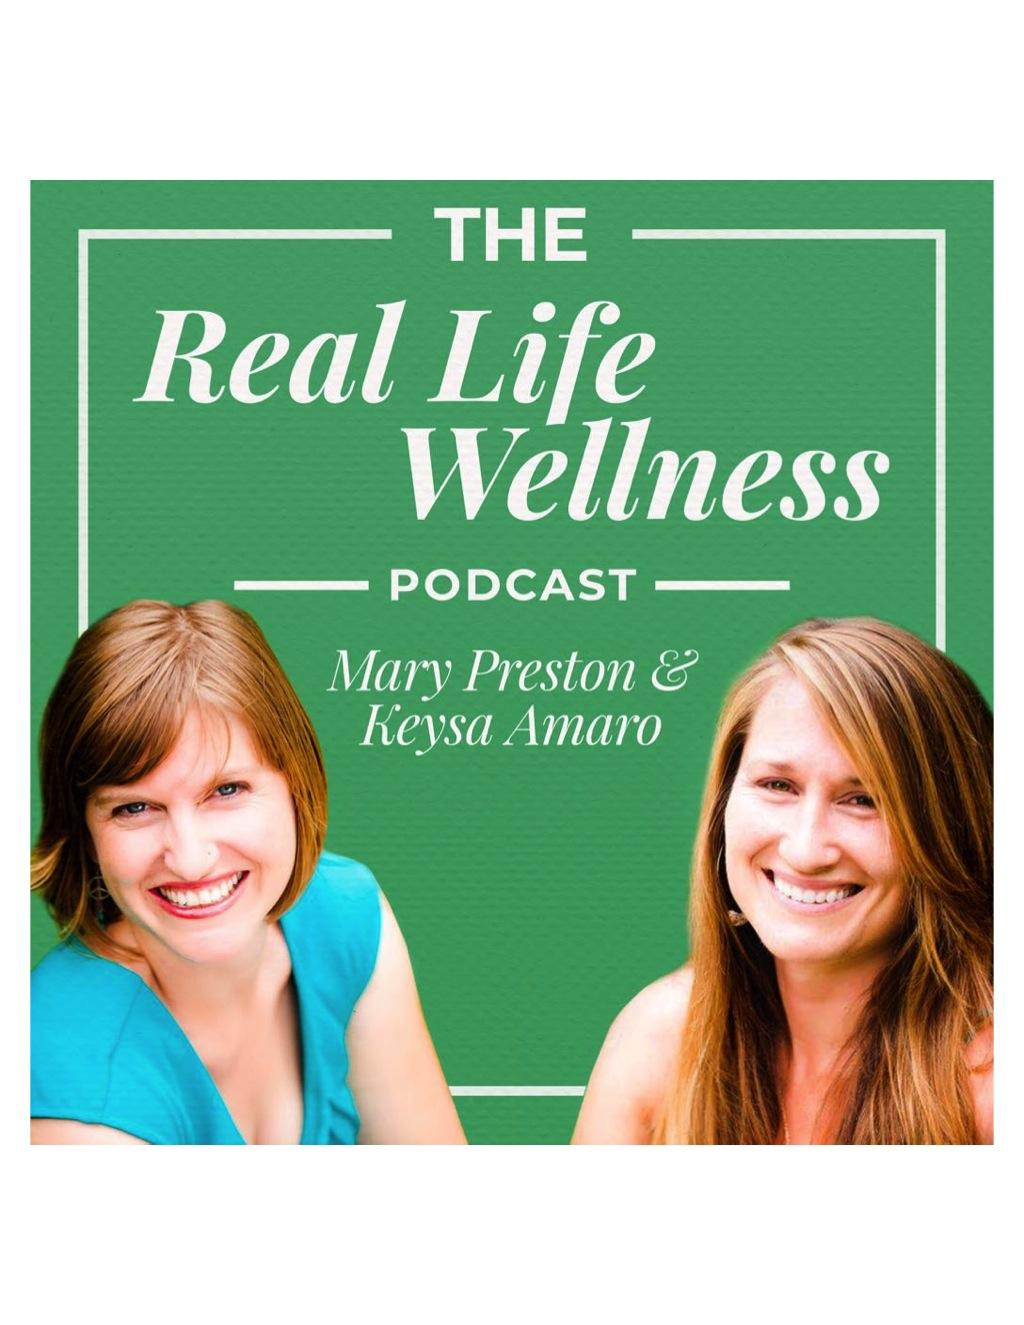 Episode 23: Meal Prepping Episode Transcript With your Hosts Mary Preston & Keysa Amaro Hi everybody, welcome to The Real Life Wellness Podcast with Mary and Keysa.